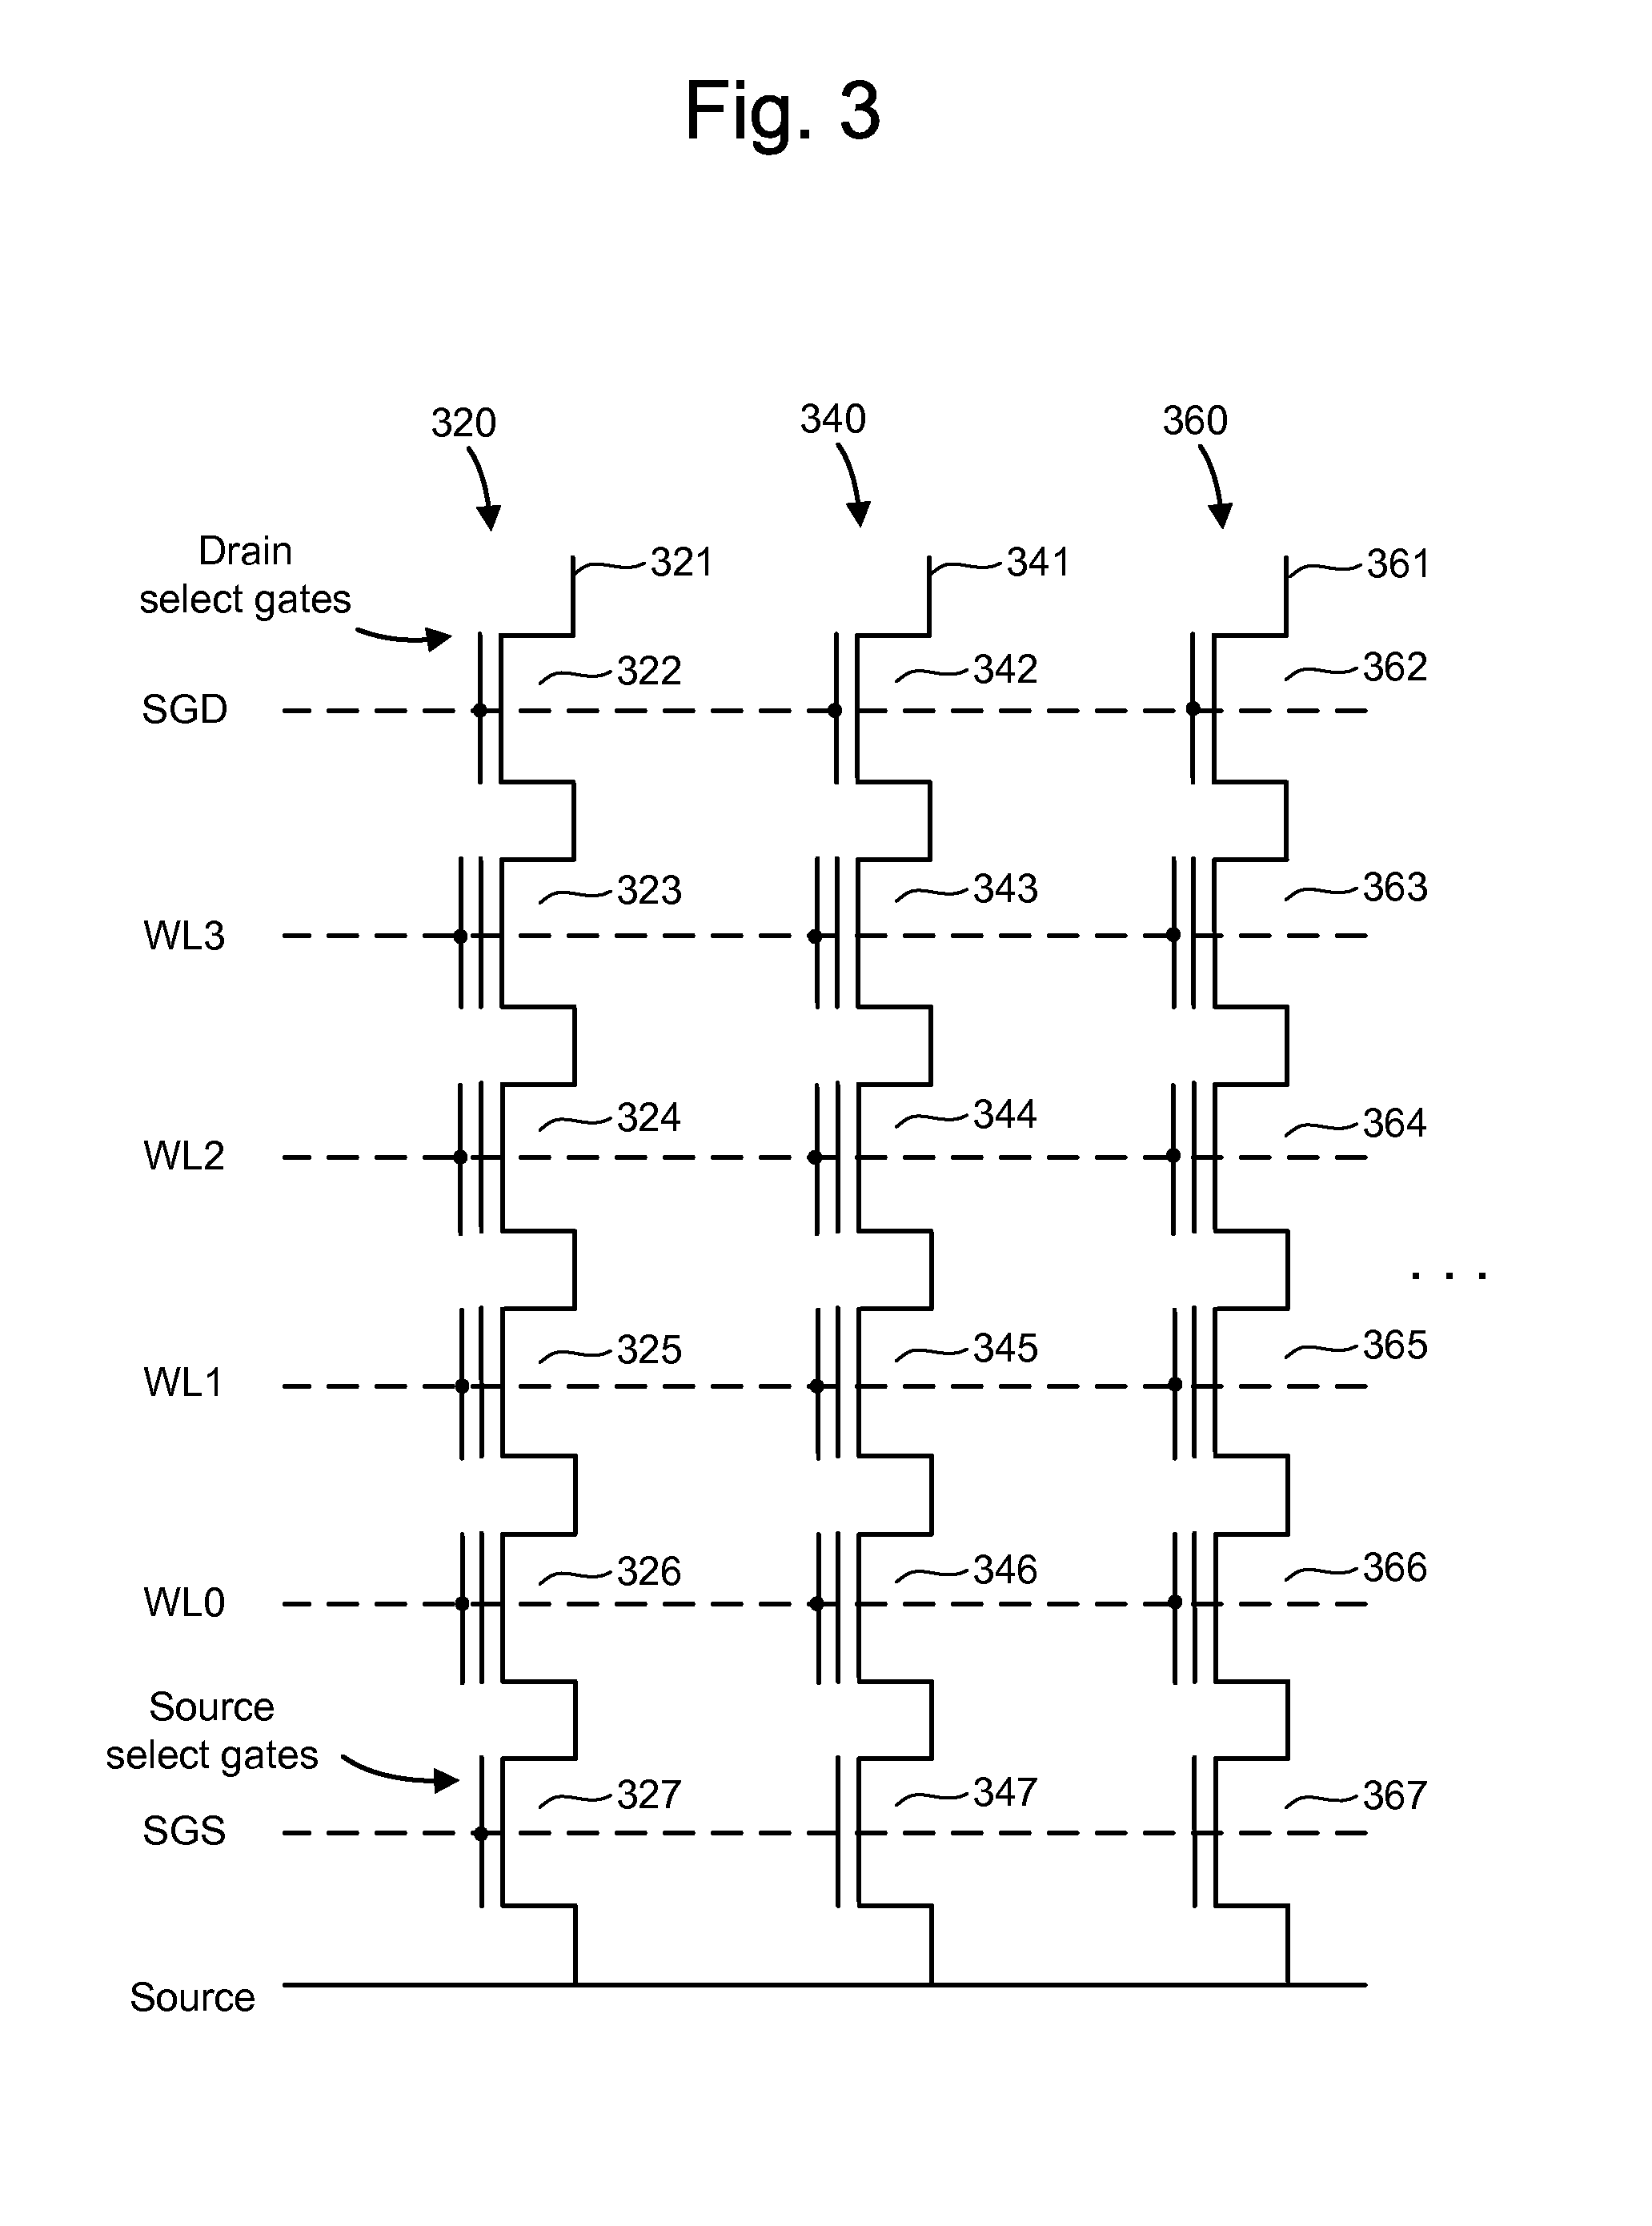 Boosting for non-volatile storage using channel isolation switching